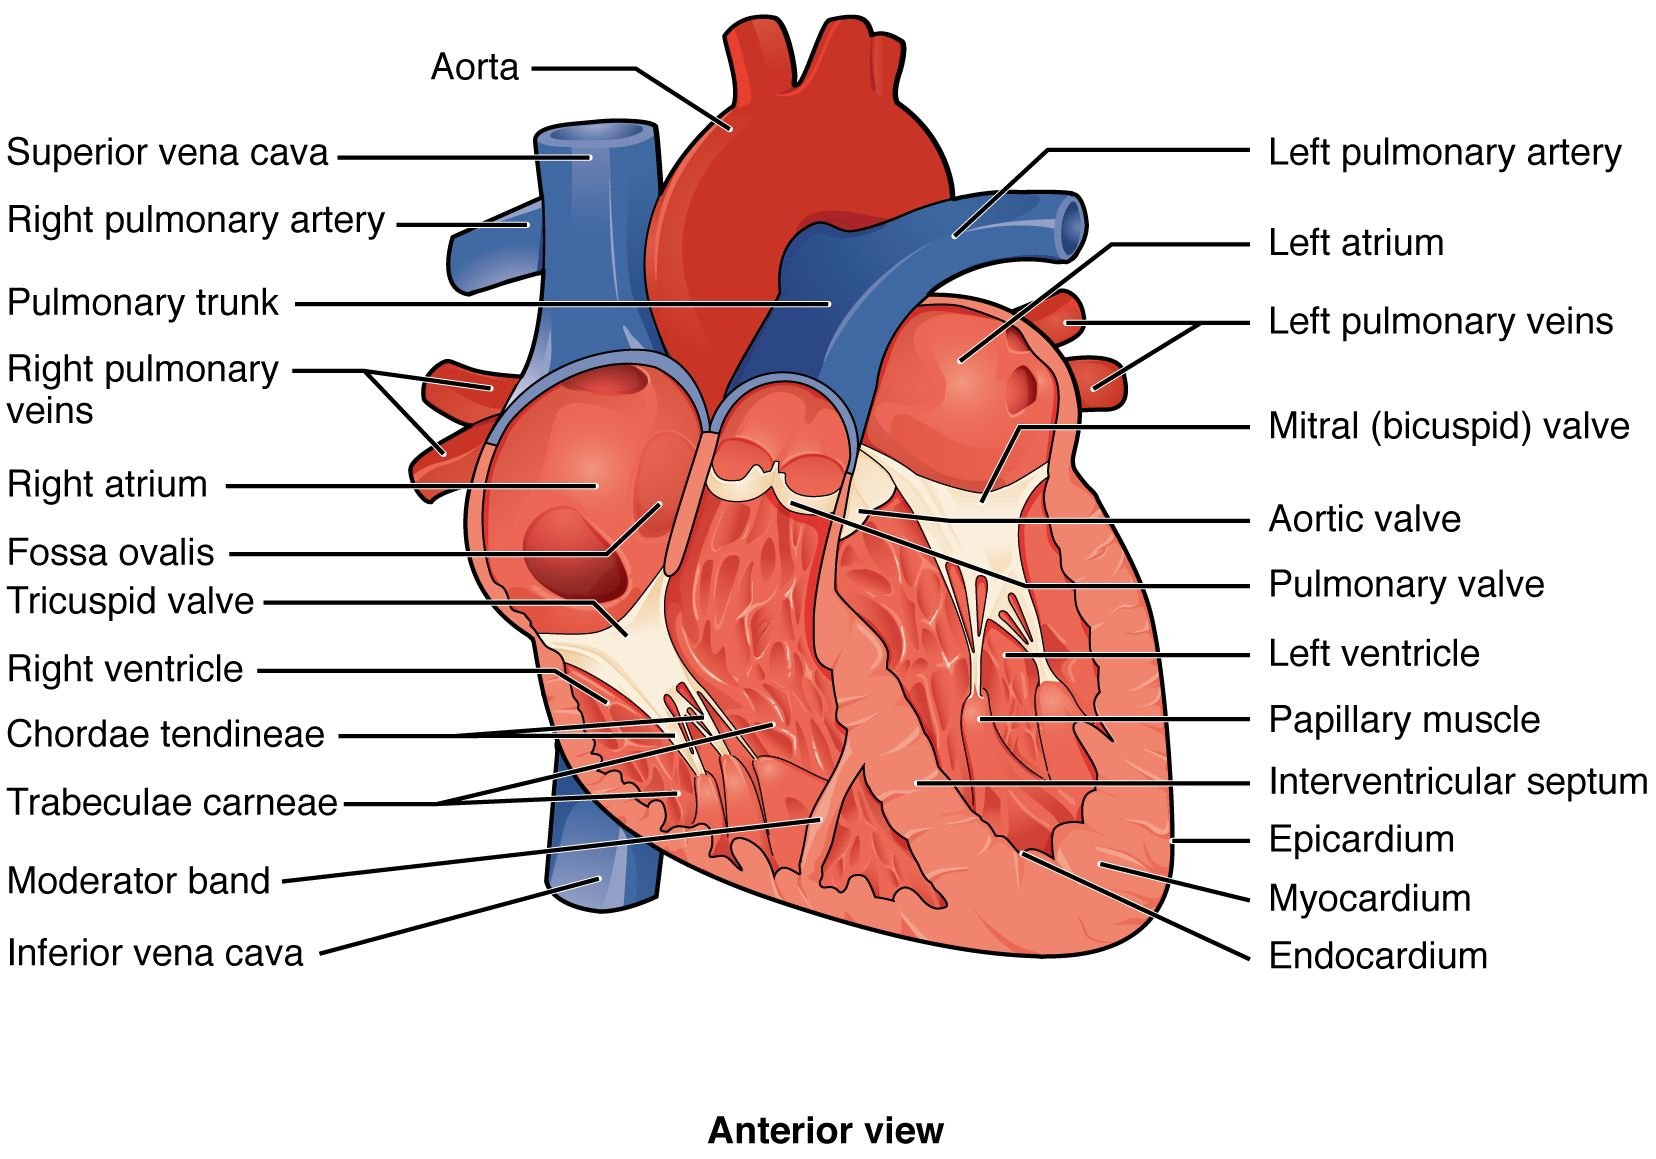 Heart Valves And The Cardiac Cycle Worksheet Answers  Briefencounters Together With Heart Valves And The Cardiac Cycle Worksheet Answers